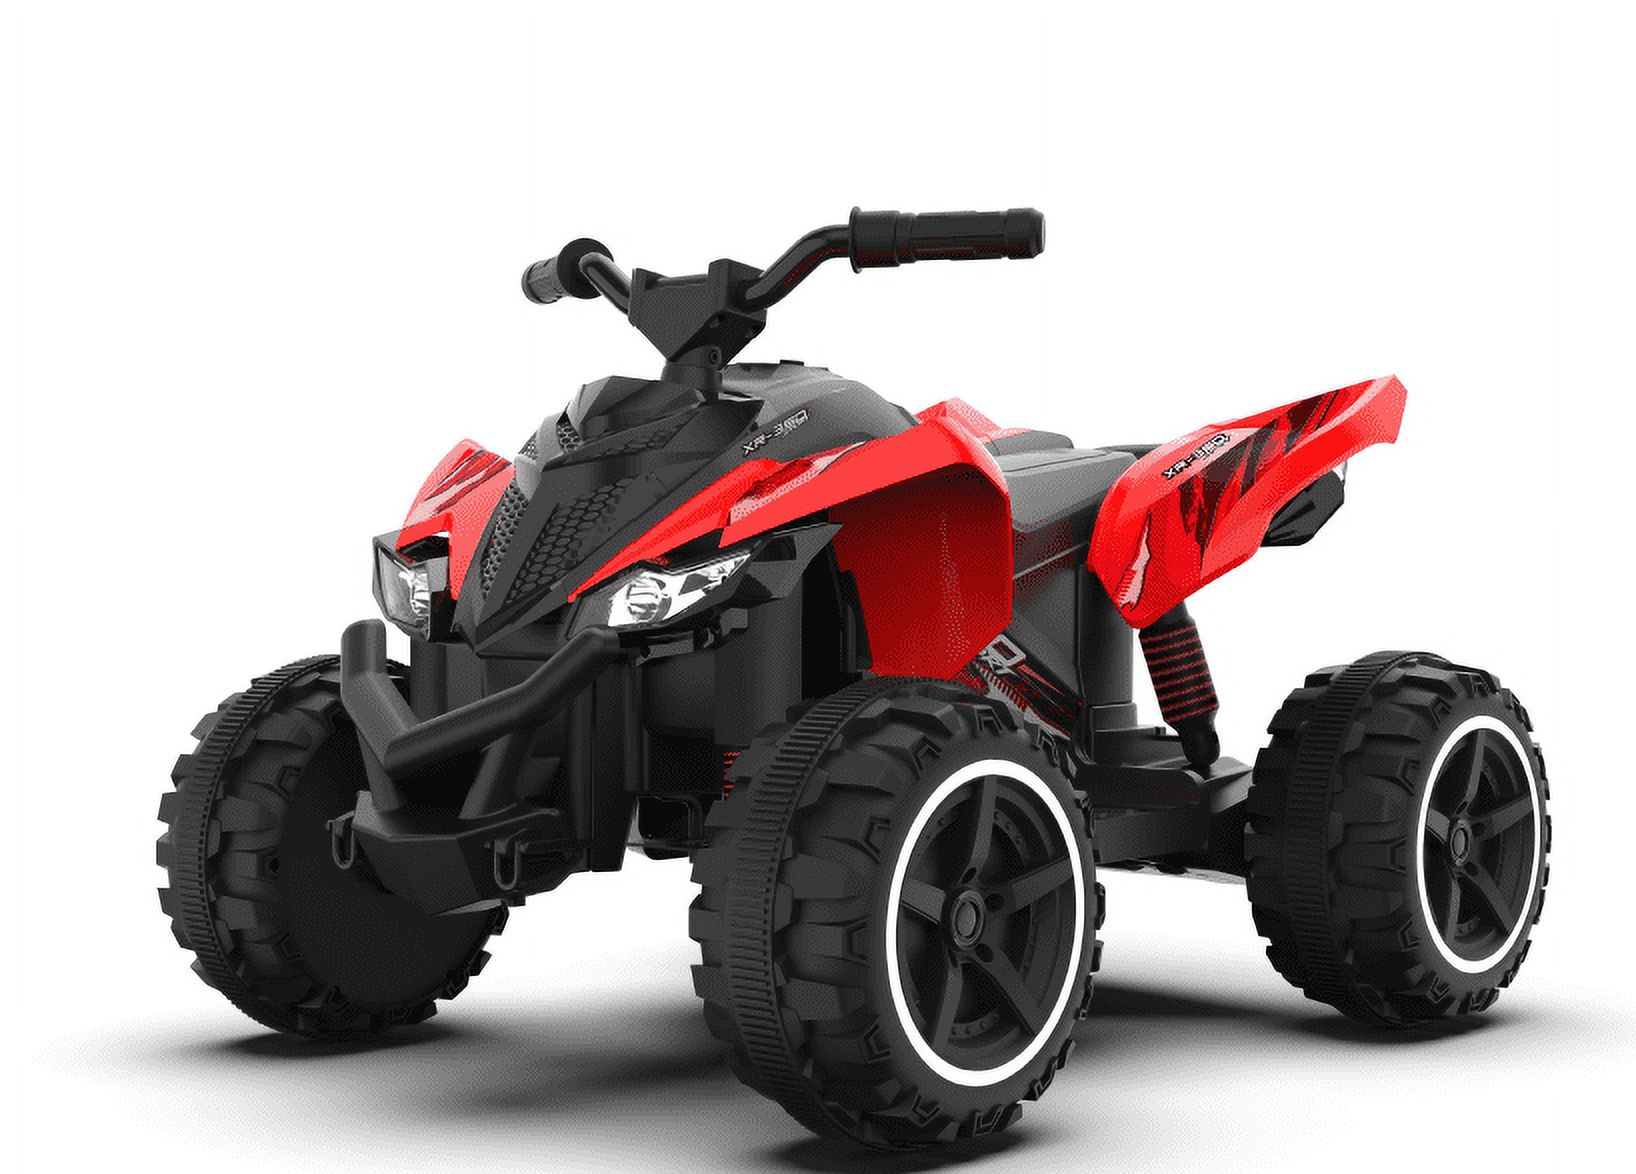 12V XR-350 ATV Powered Ride-on by Action Wheels, Red, for Children, Unisex, Ages 2-4 Years Old - image 1 of 26